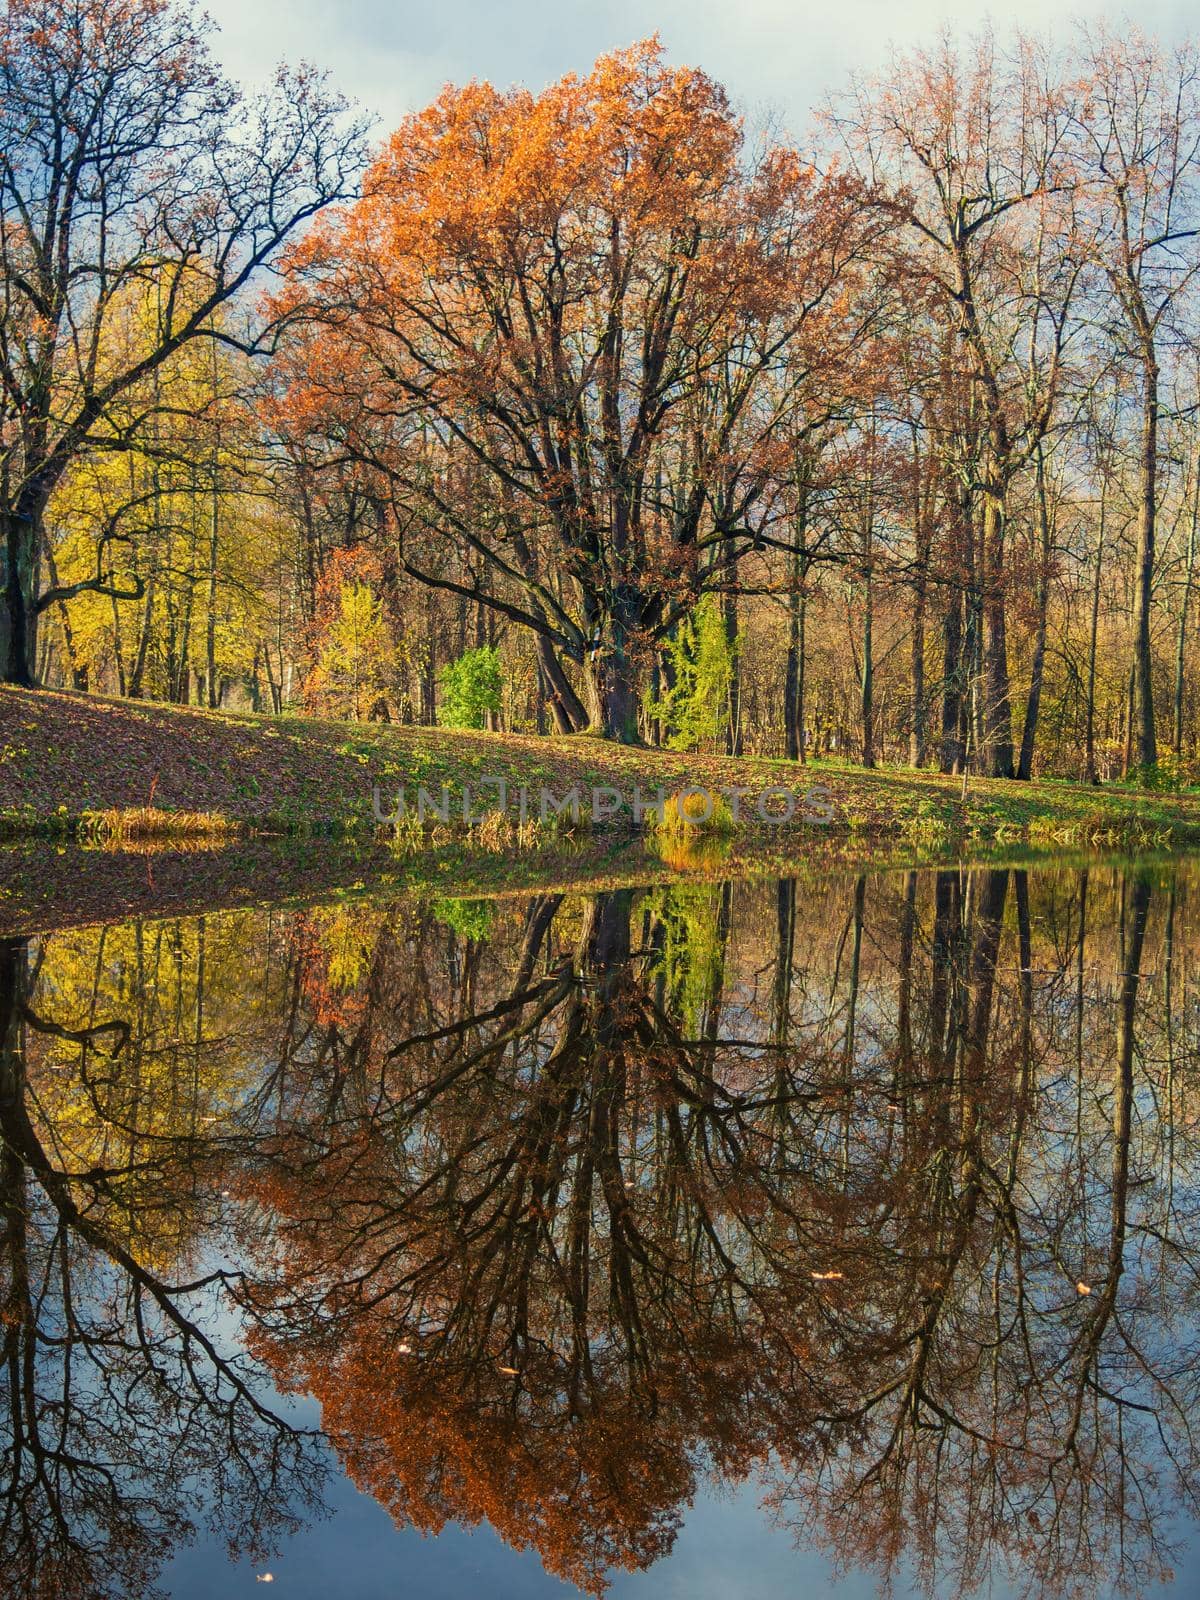 Autumn landscape. The tree is reflected in the lake